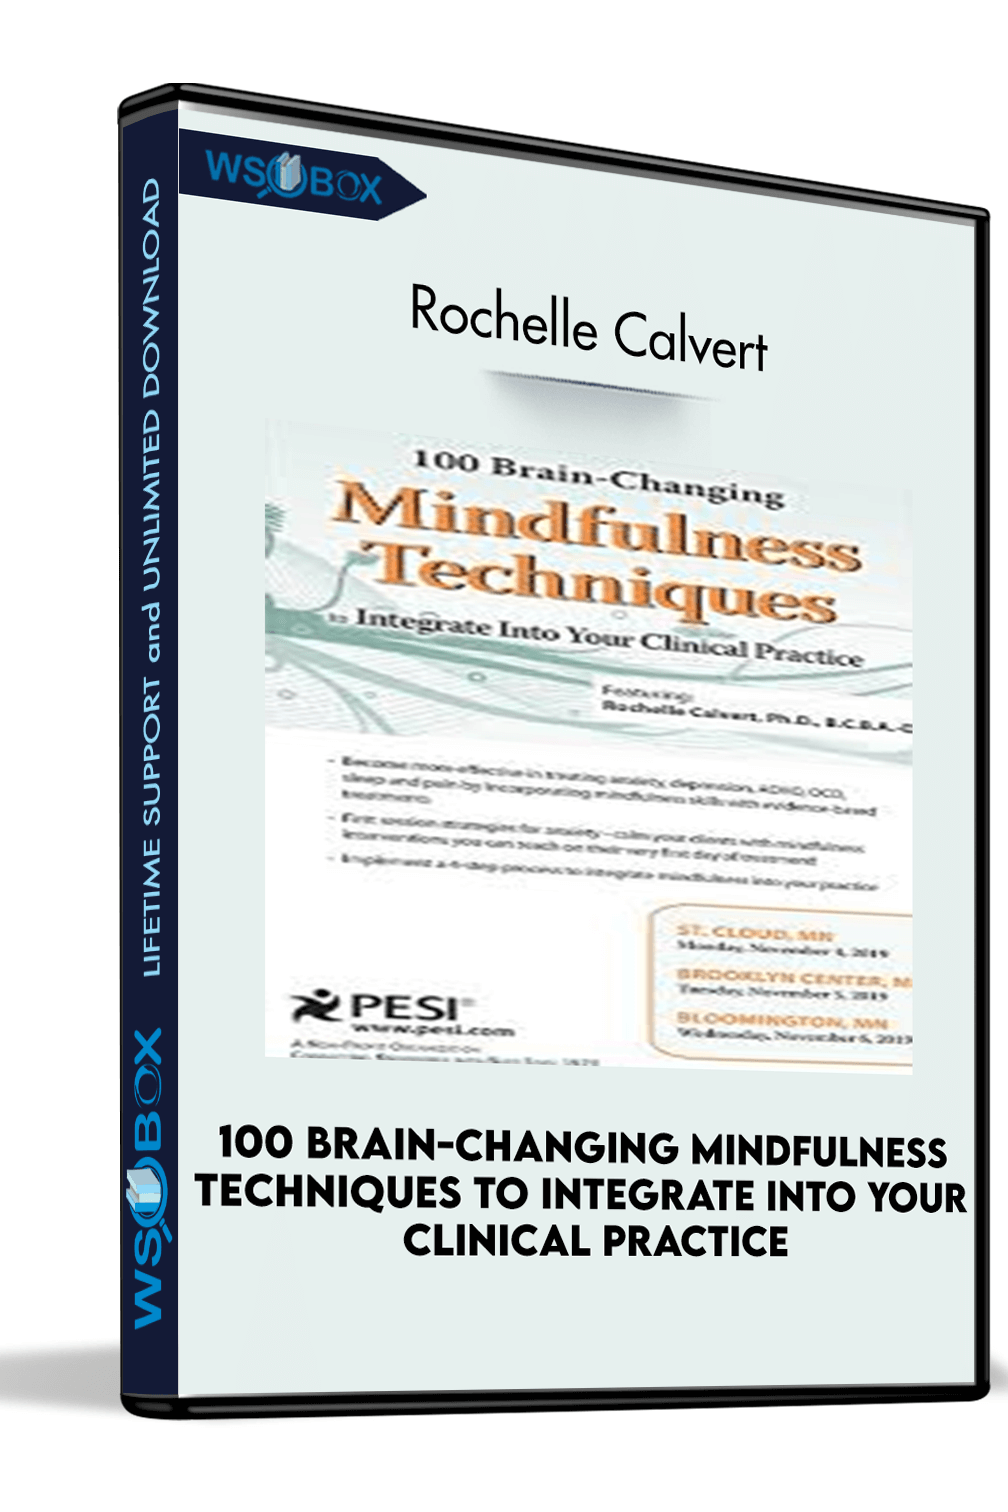 100 Brain-Changing Mindfulness Techniques to Integrate Into Your Clinical Practice - Rochelle Calvert